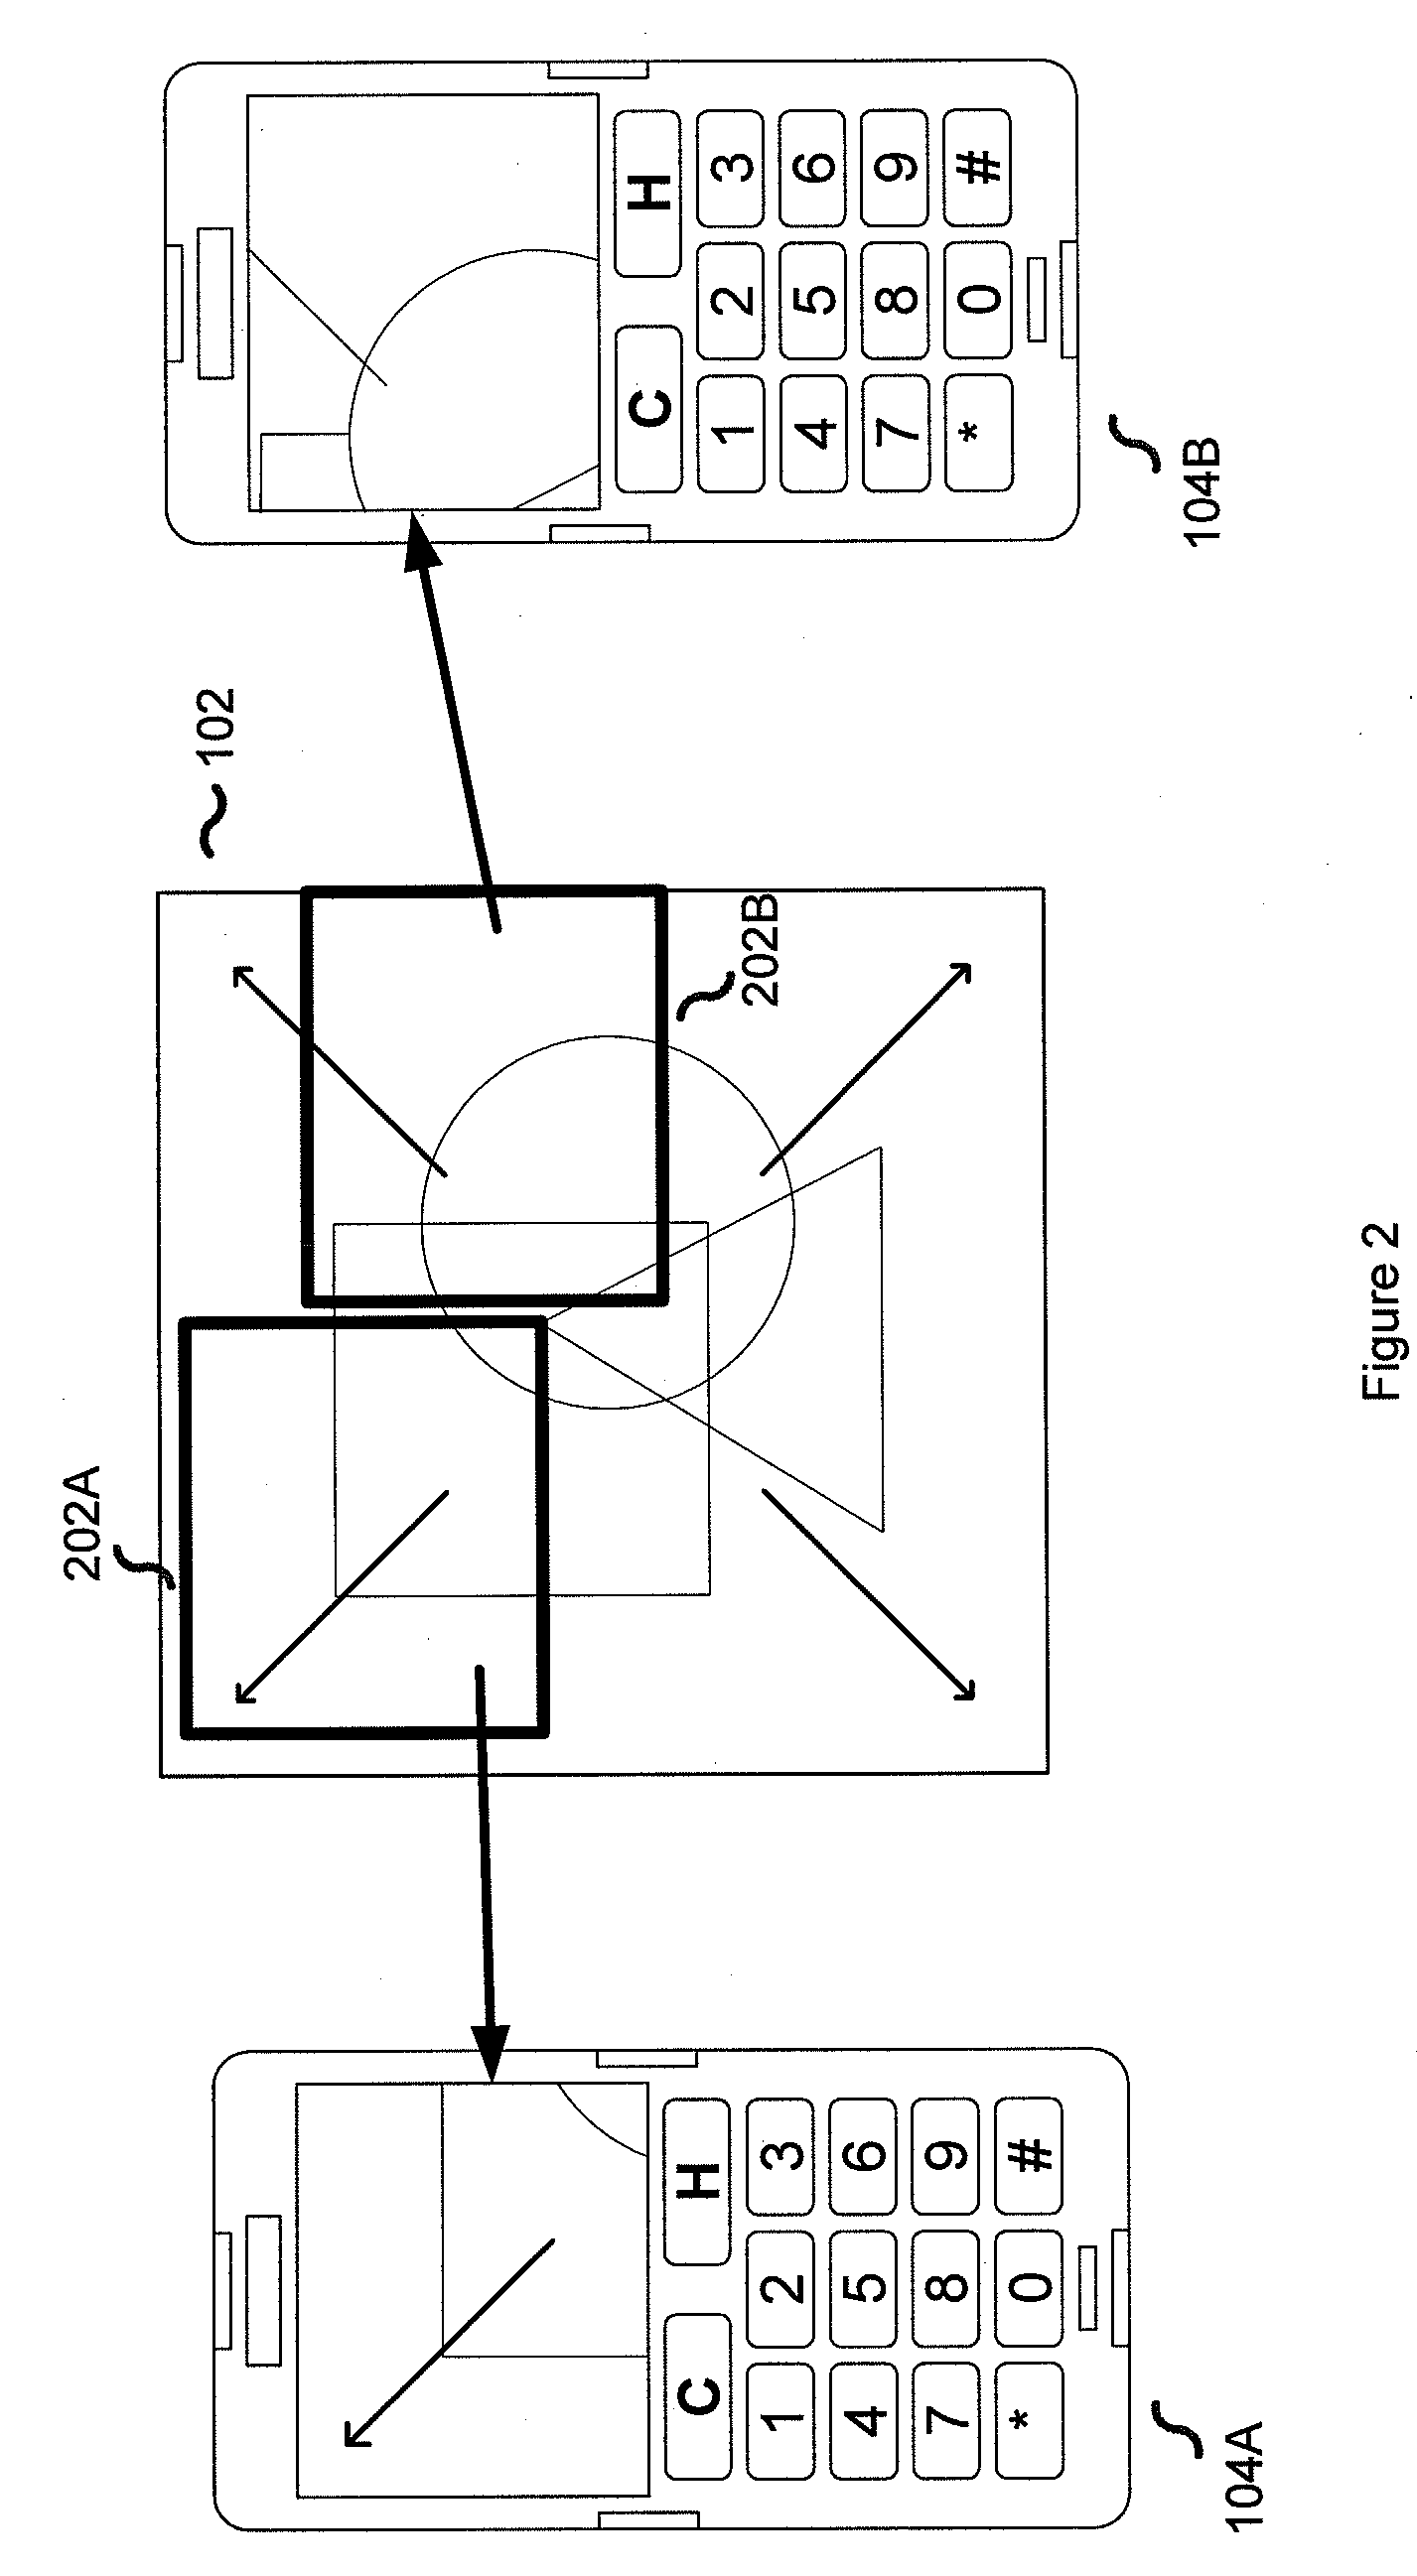 Method and System for Creation and Control of Virtual Rendering Devices